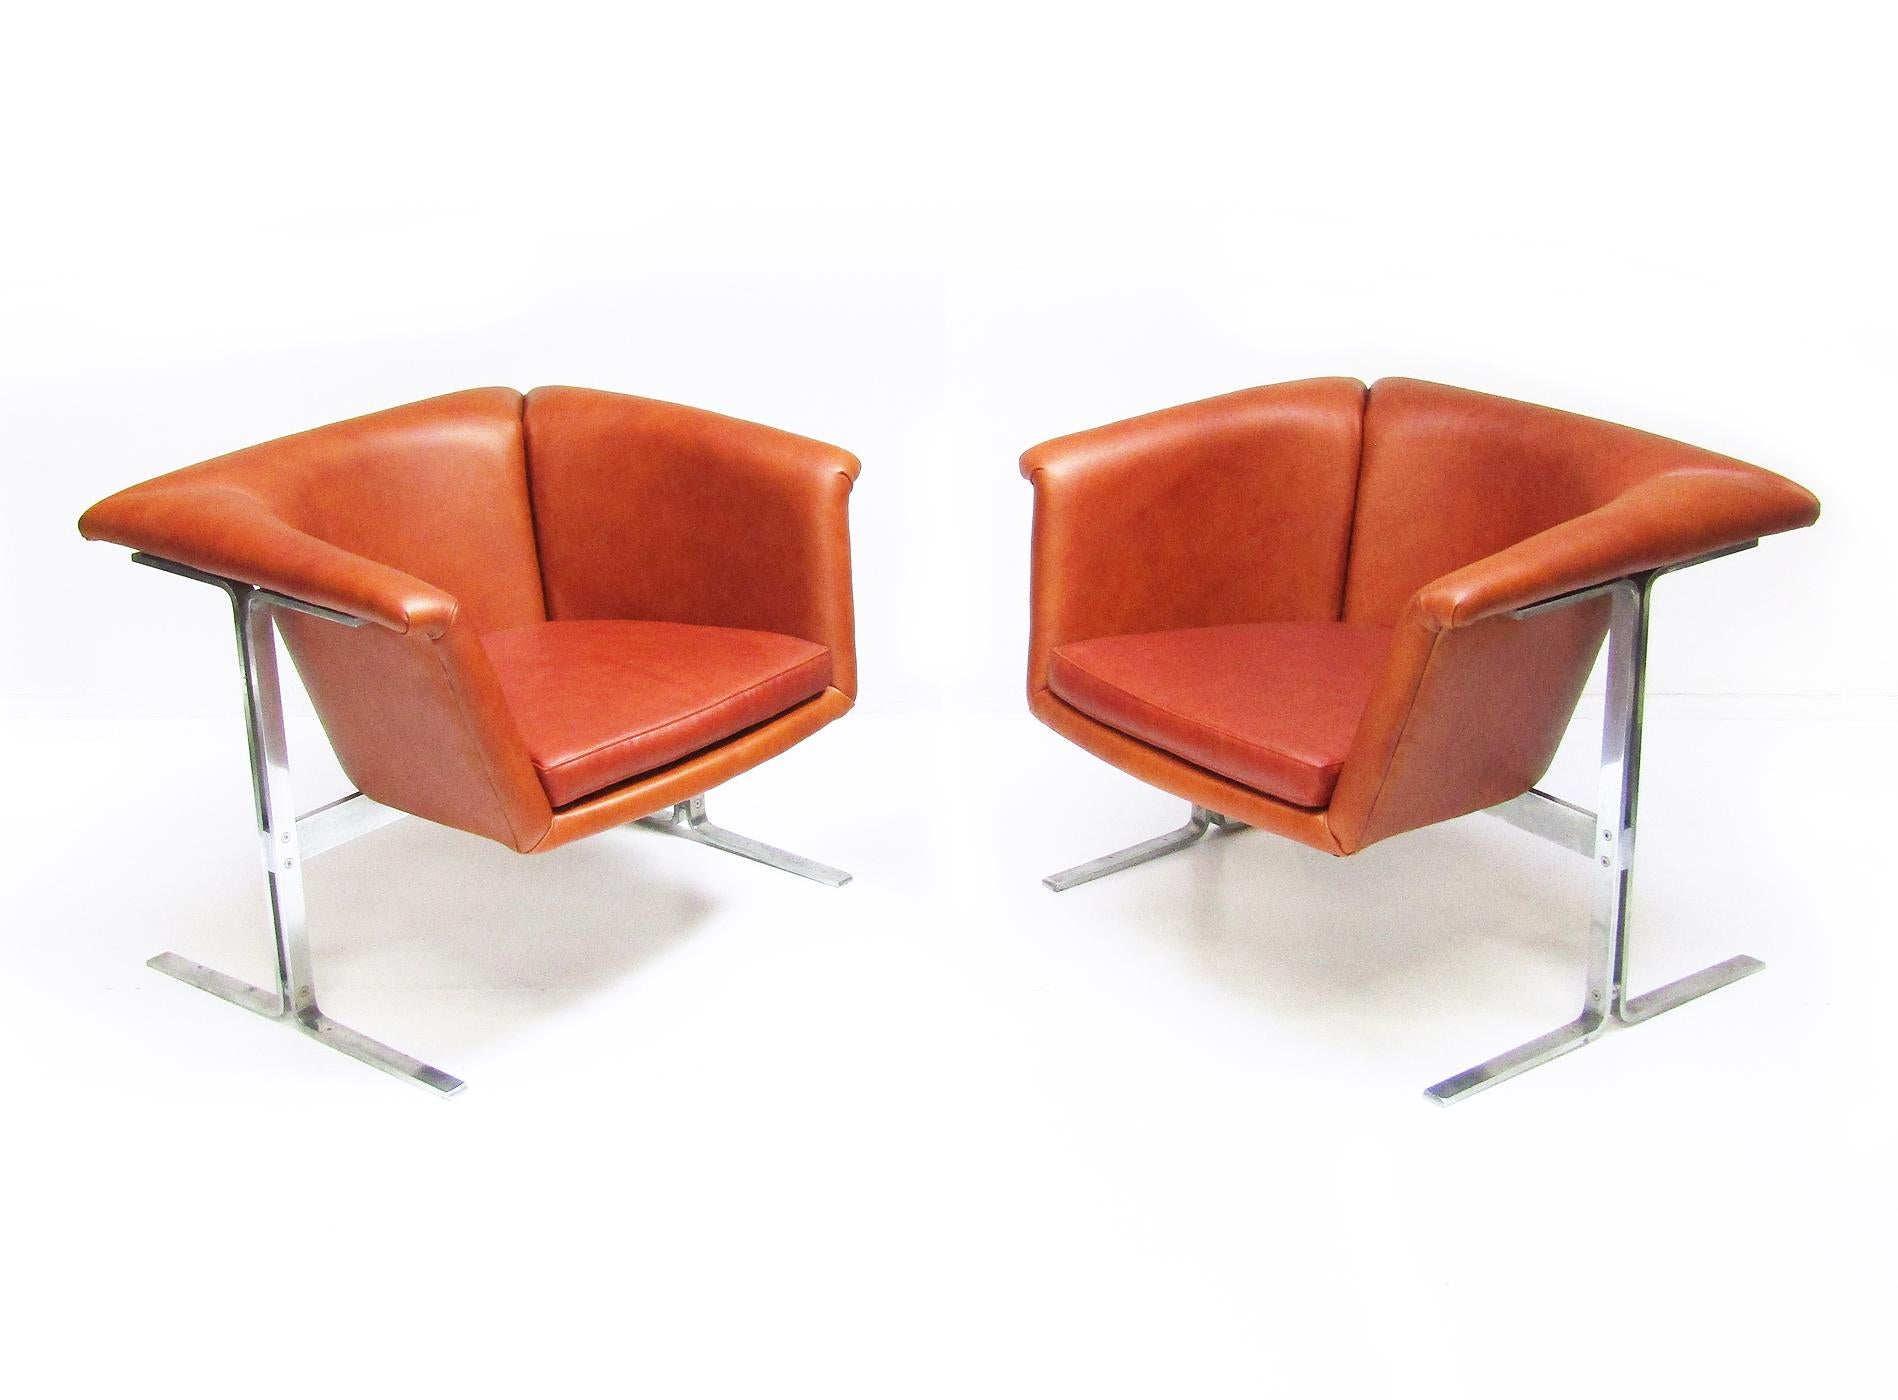 A pair of model 042 chairs in cognac leather by Geoffrey Harcourt for Artifort.

Produced in 1963, Harcourt's 042 chairs were featured in Stanley Kubrik's seminal film 